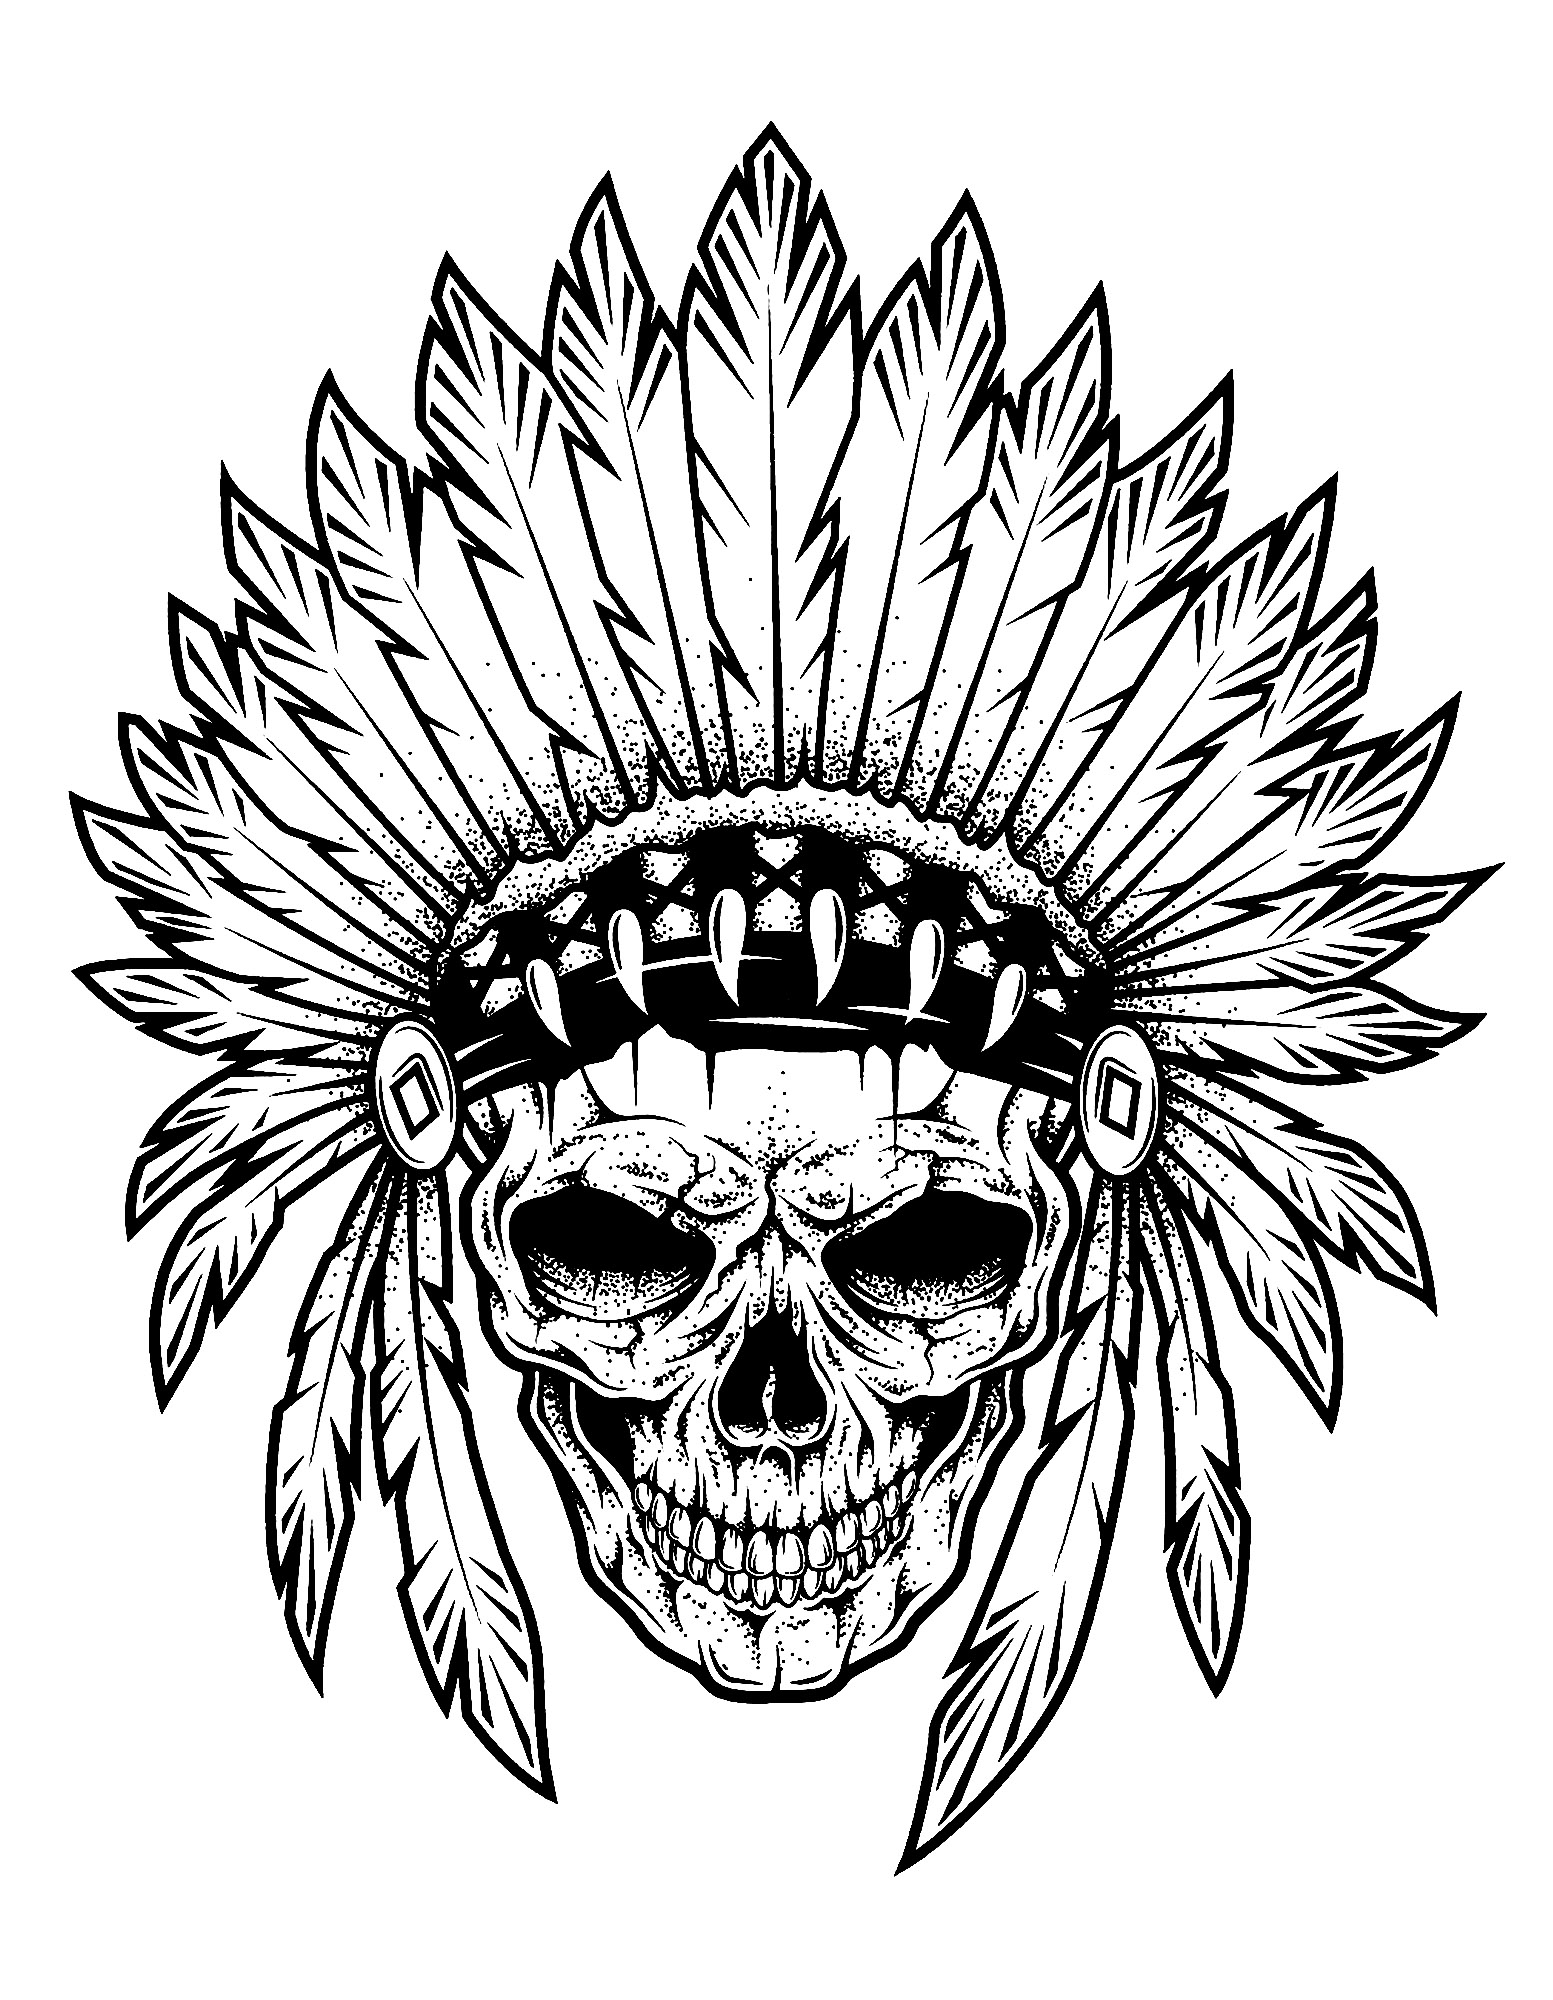 indian coloring page